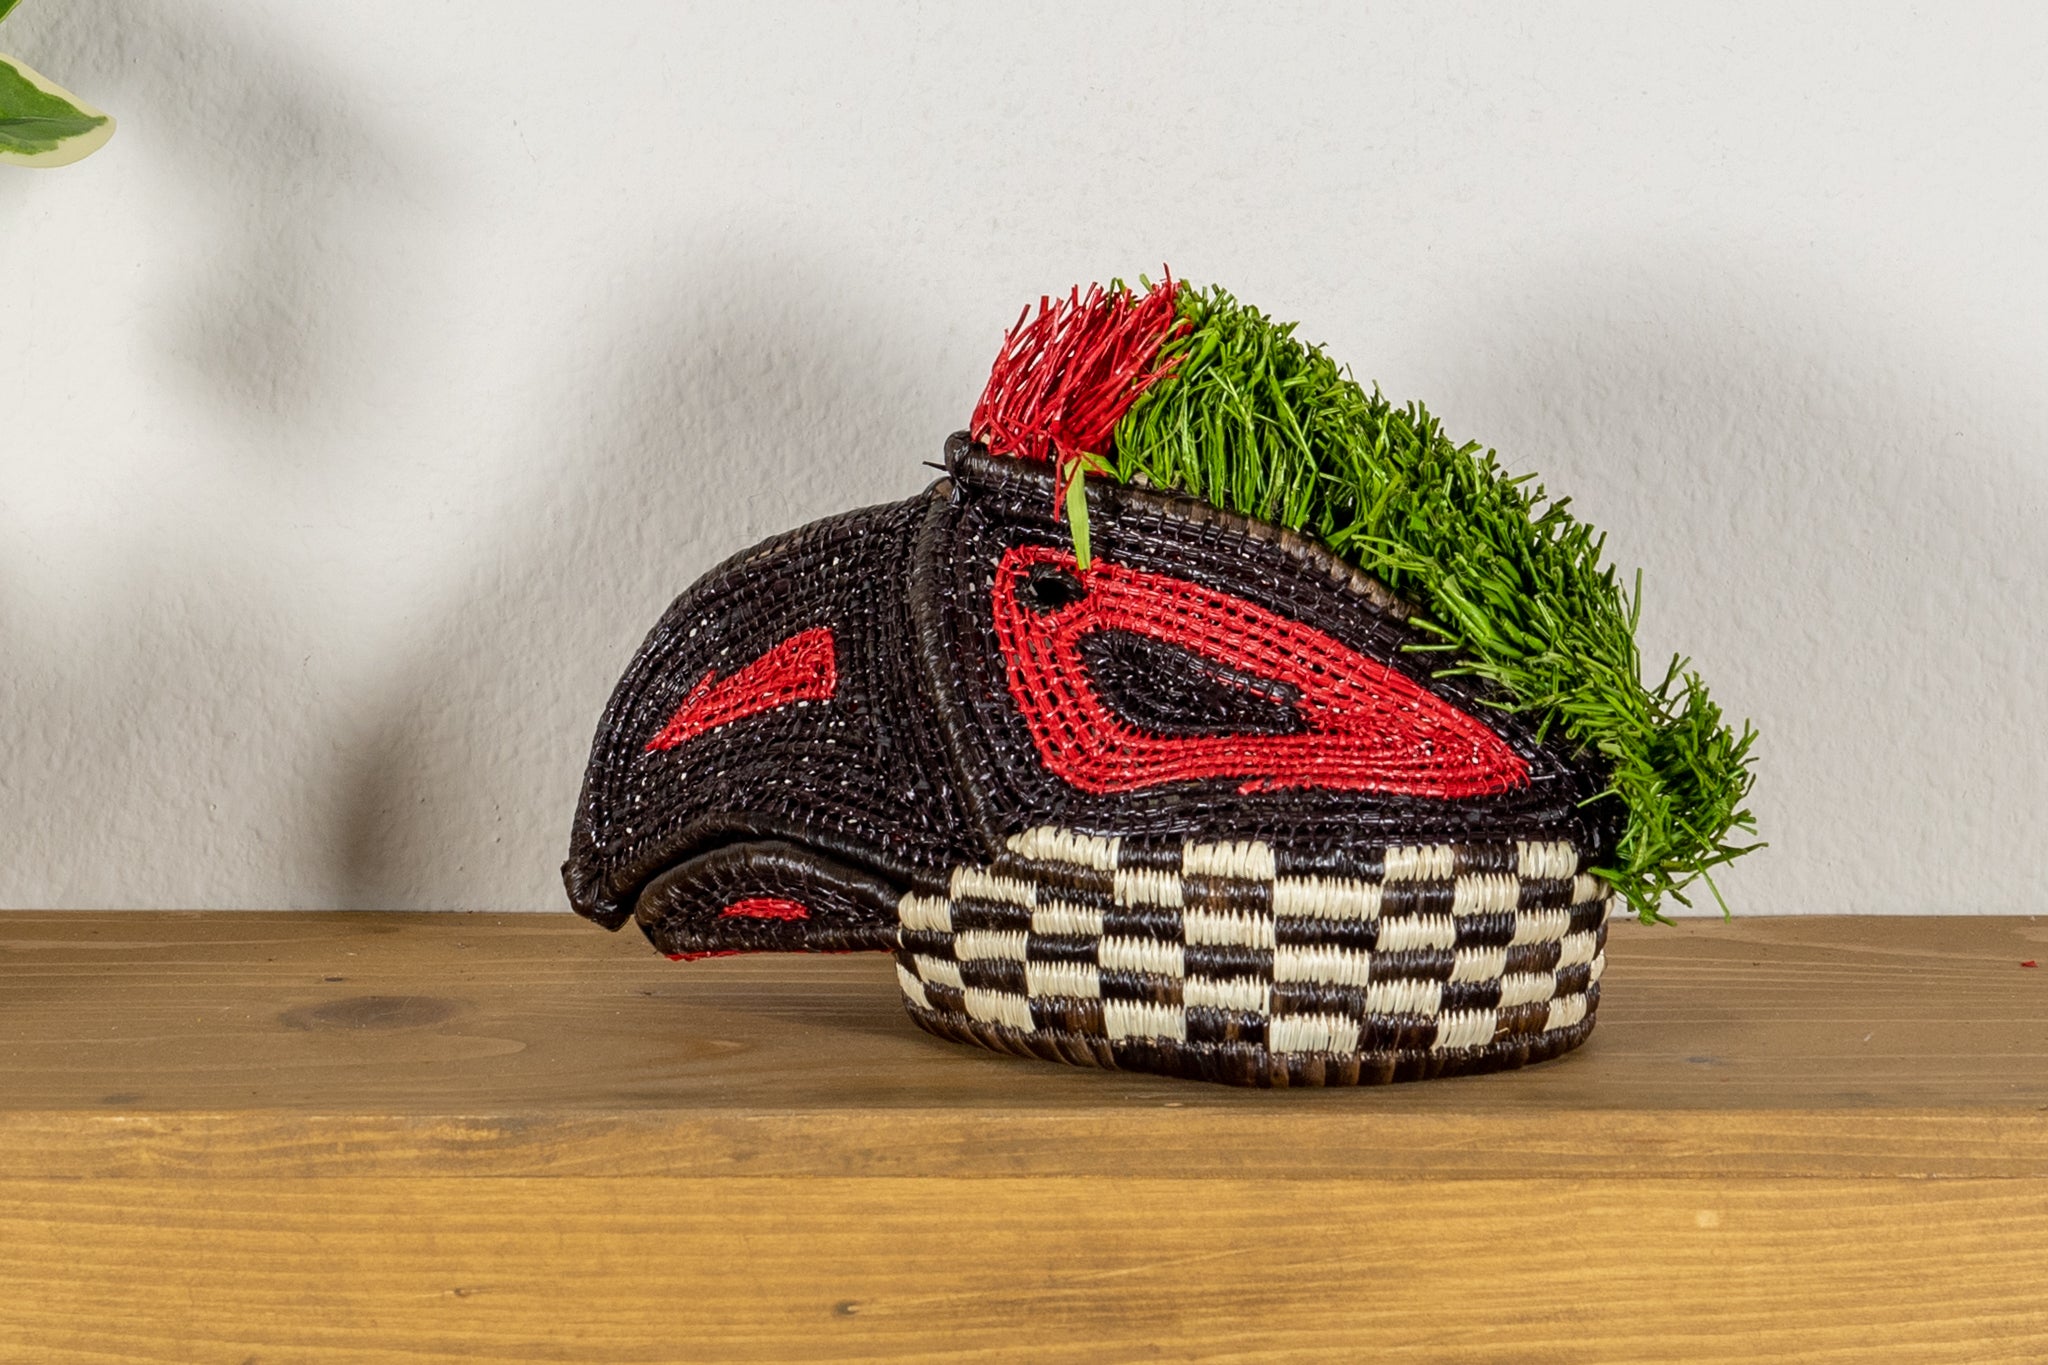 Red Green and Black Parrot Mask